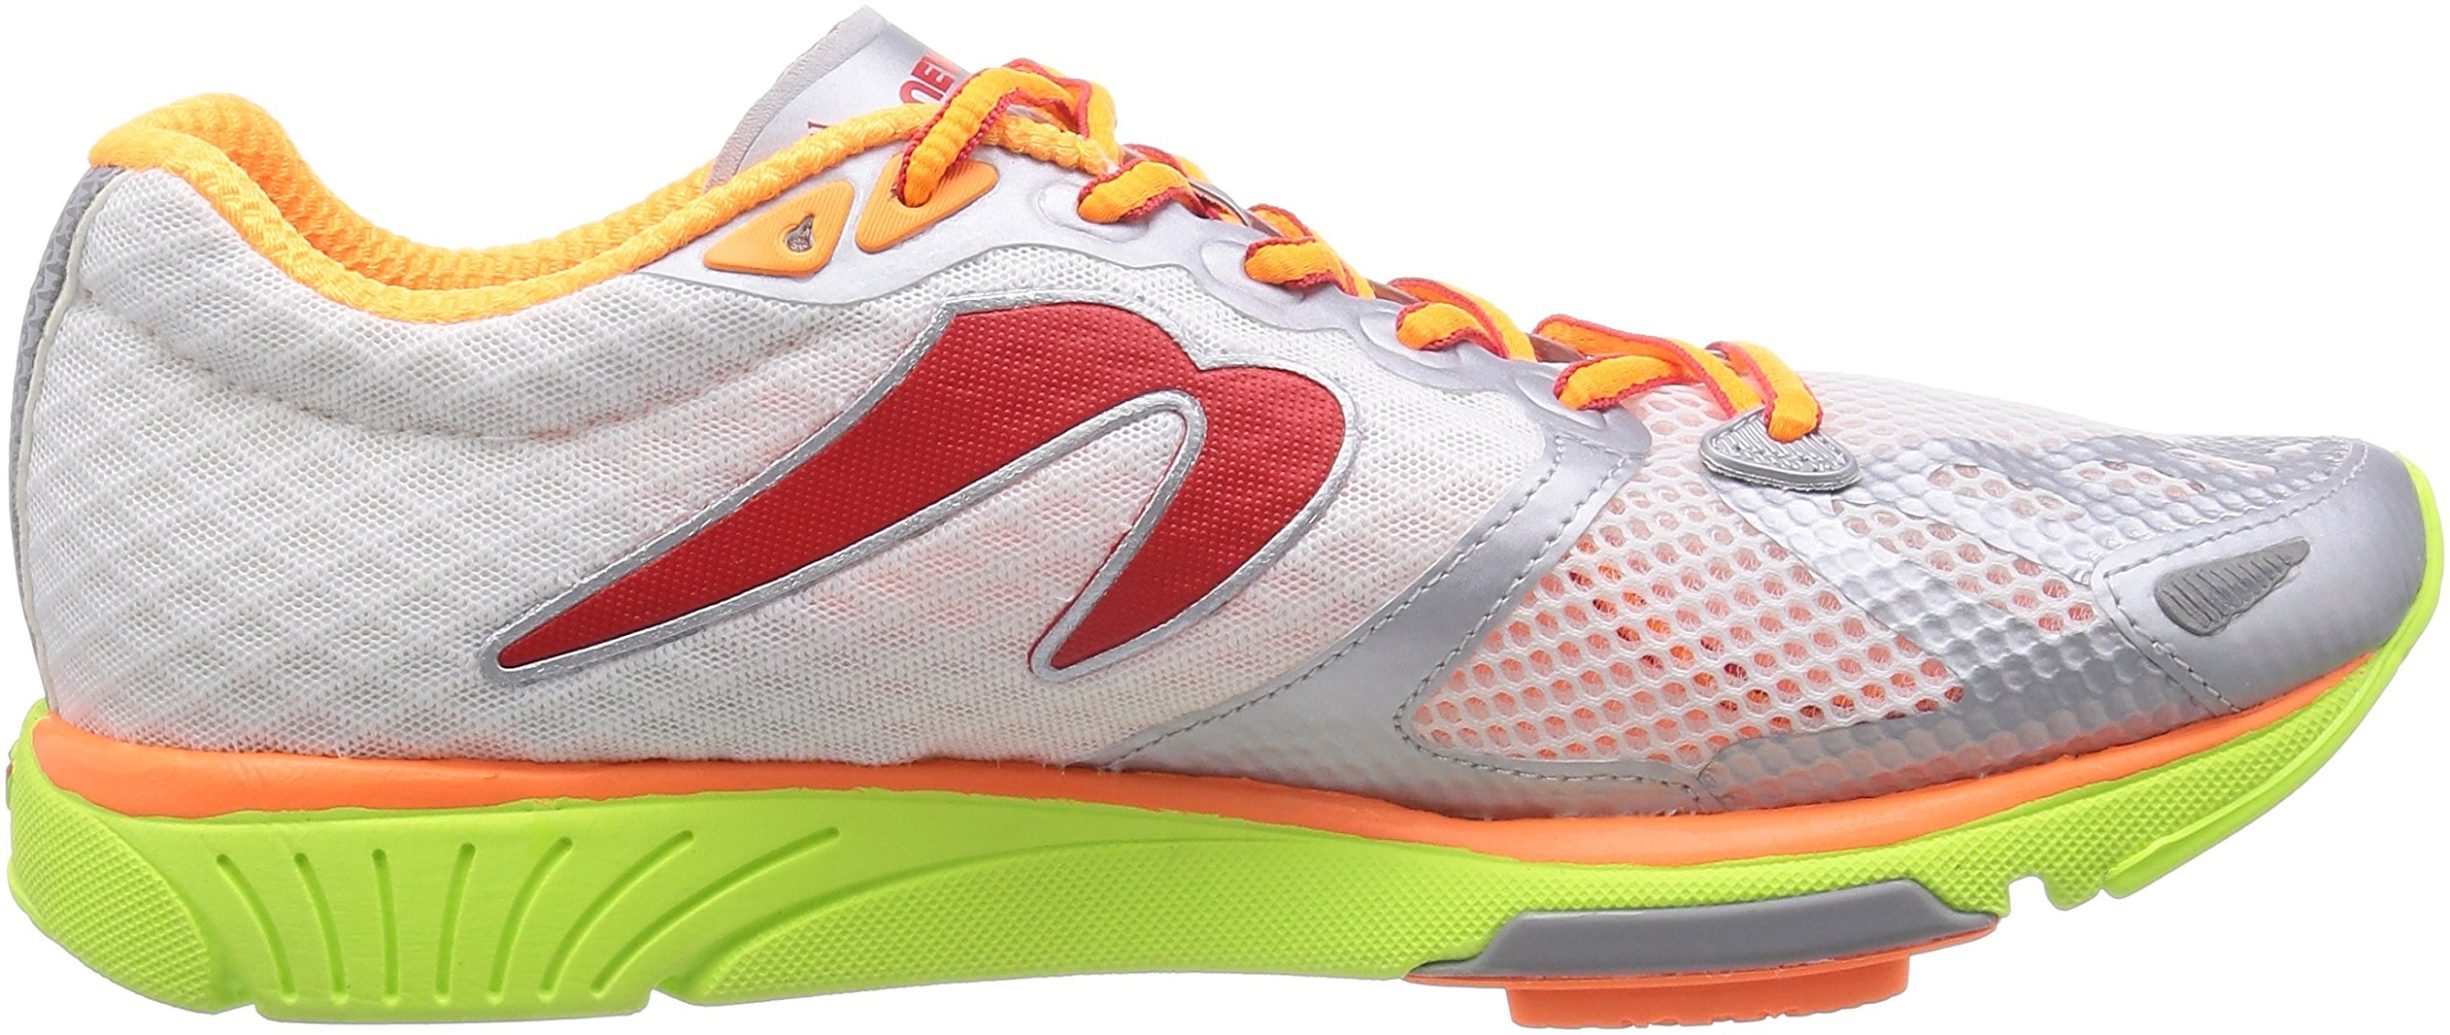 newton stability running shoes